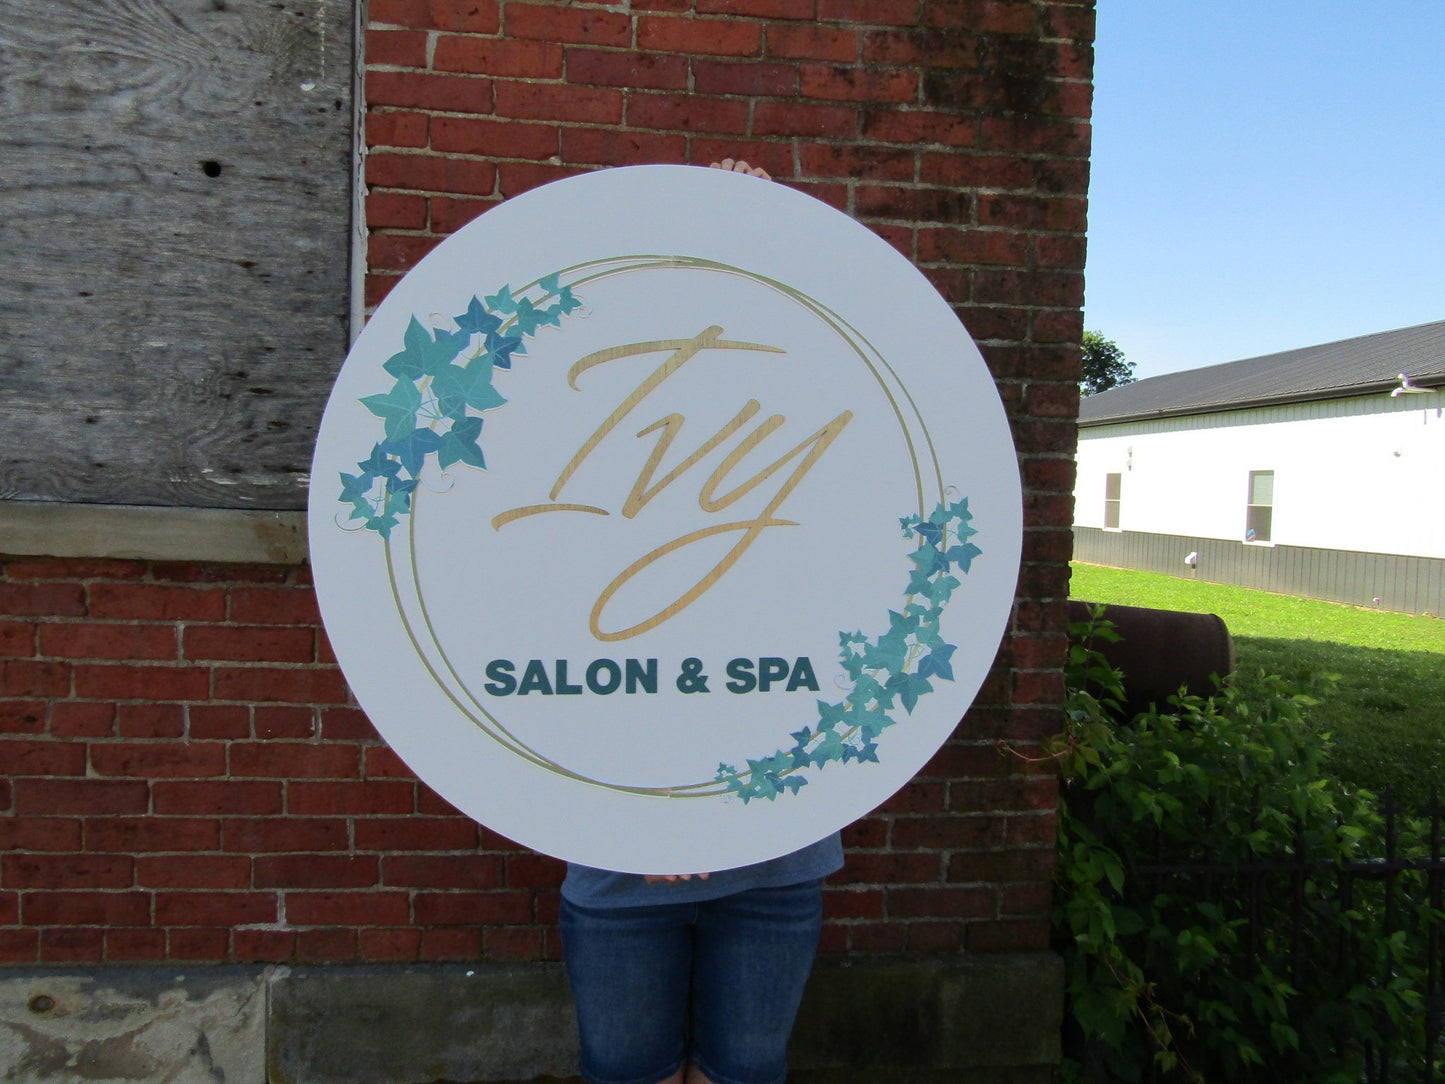 Printed and Raised Pretty Salon and Spa Ivy Gold Your Logo Beauty Commerical Signage Building Front Small Shop Logo Circle Wooden Handmade